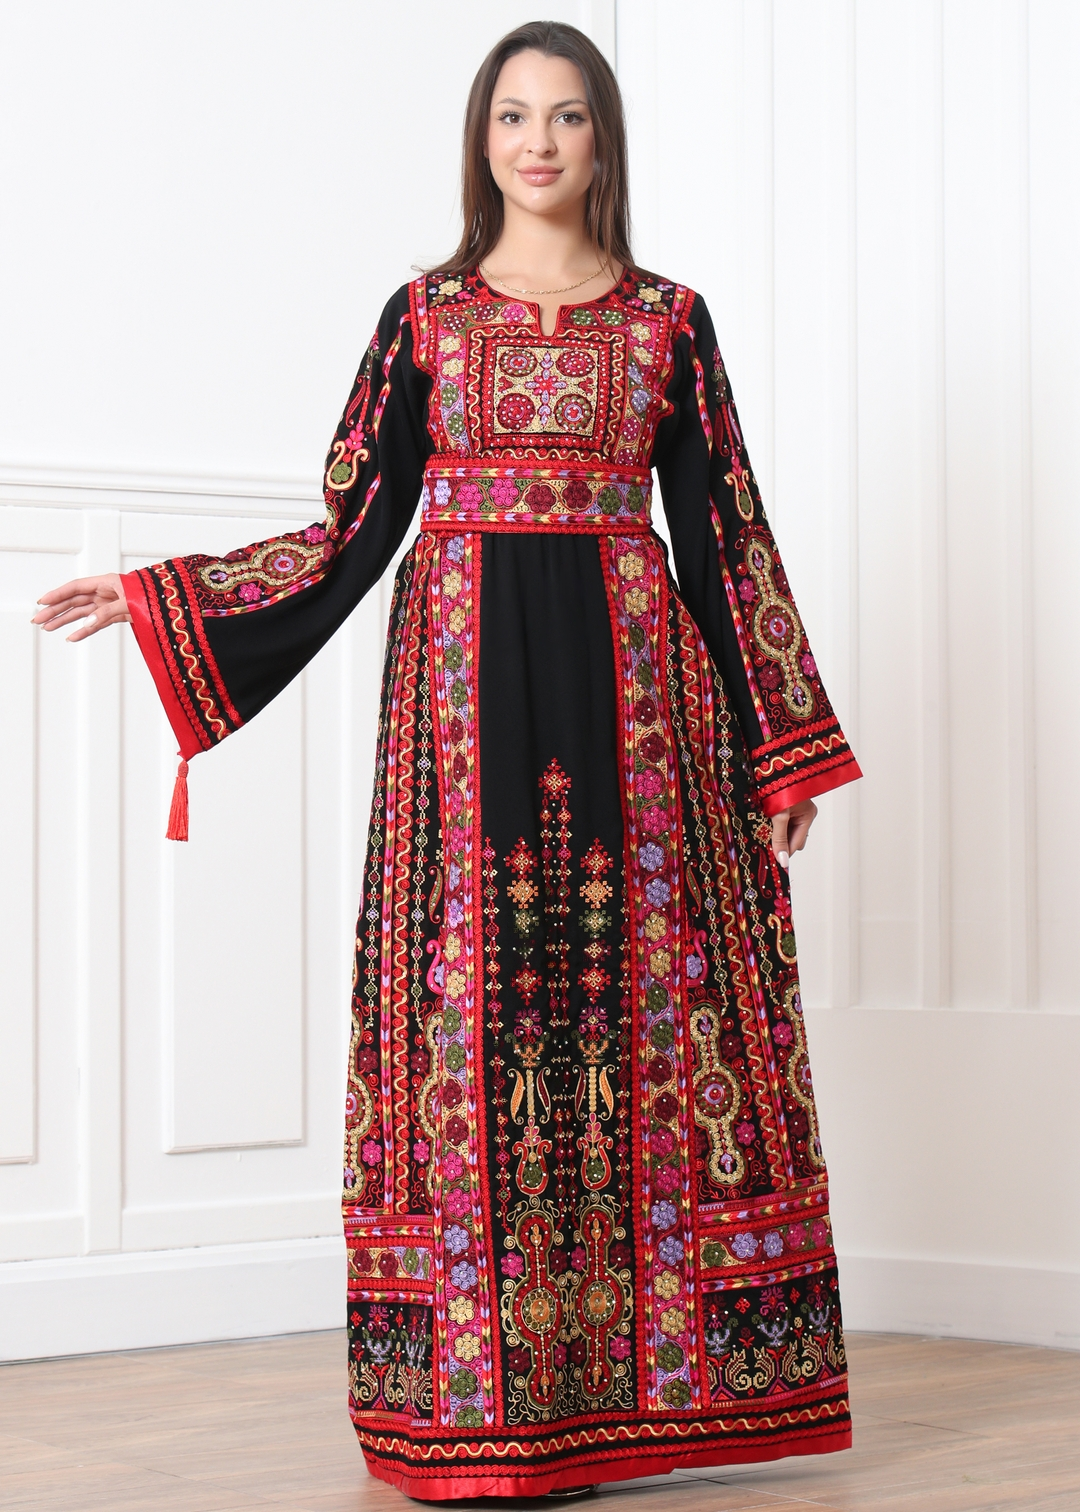 Black & Red Beauty Thobe With Reversible Red Satin Belt - Very High Quality Embroidered Palestinian style Thobe